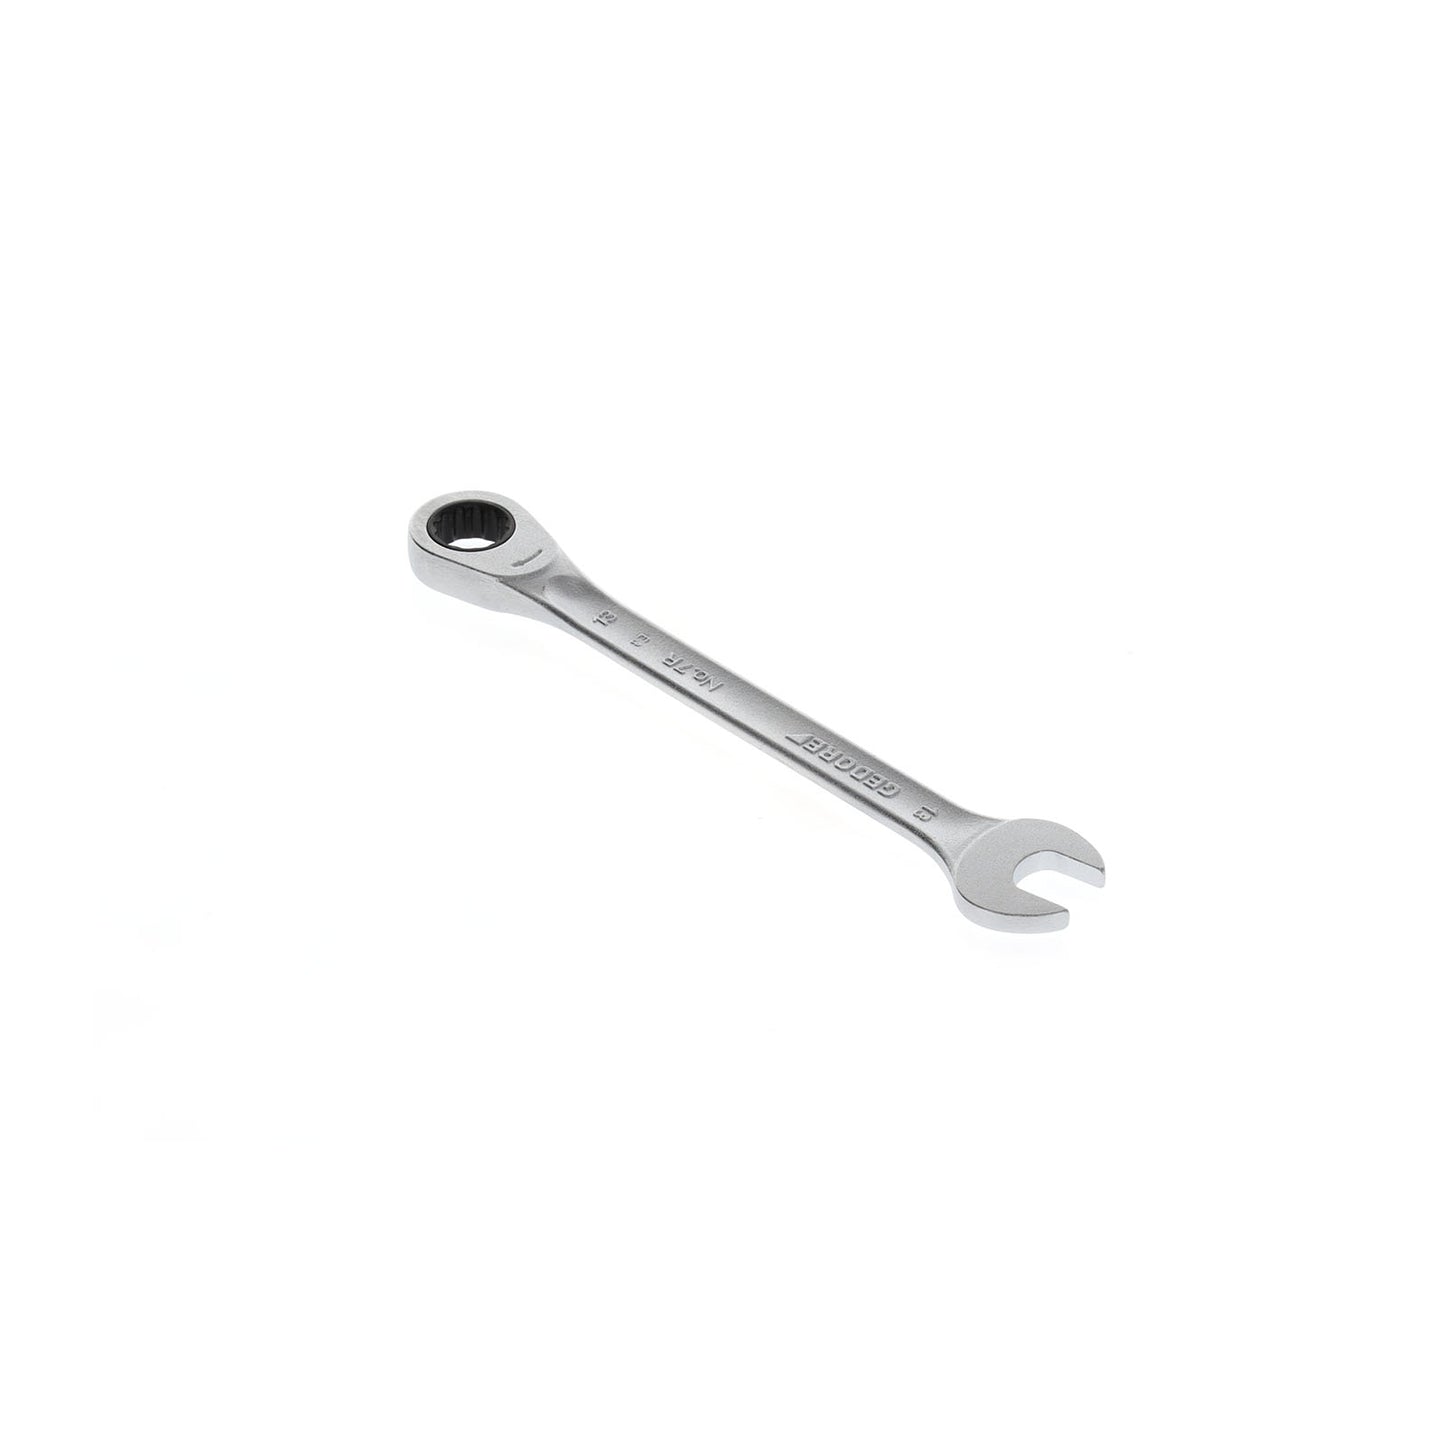 GEDORE 7 R 13 - Ratchet combination wrench, 13mm (2297116)